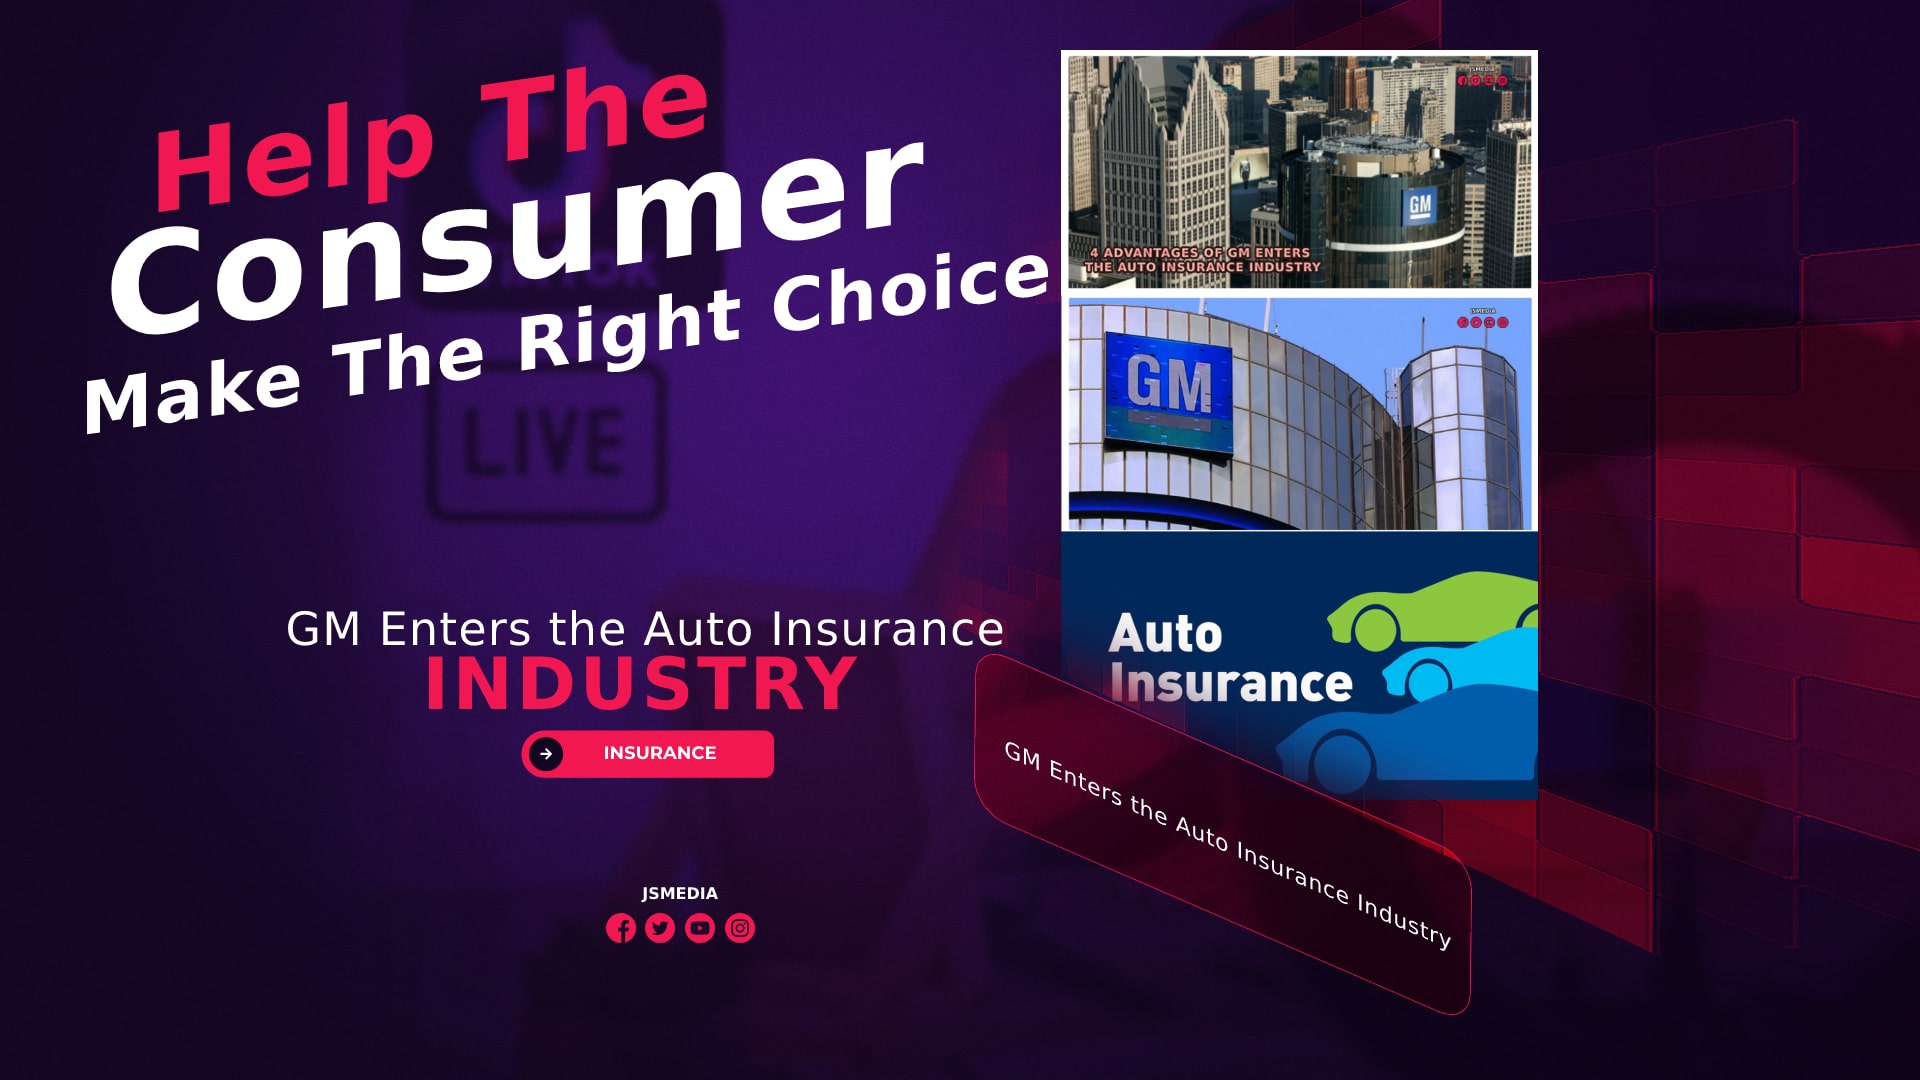 Auto Insurance - GM Enters the Auto Insurance Industry